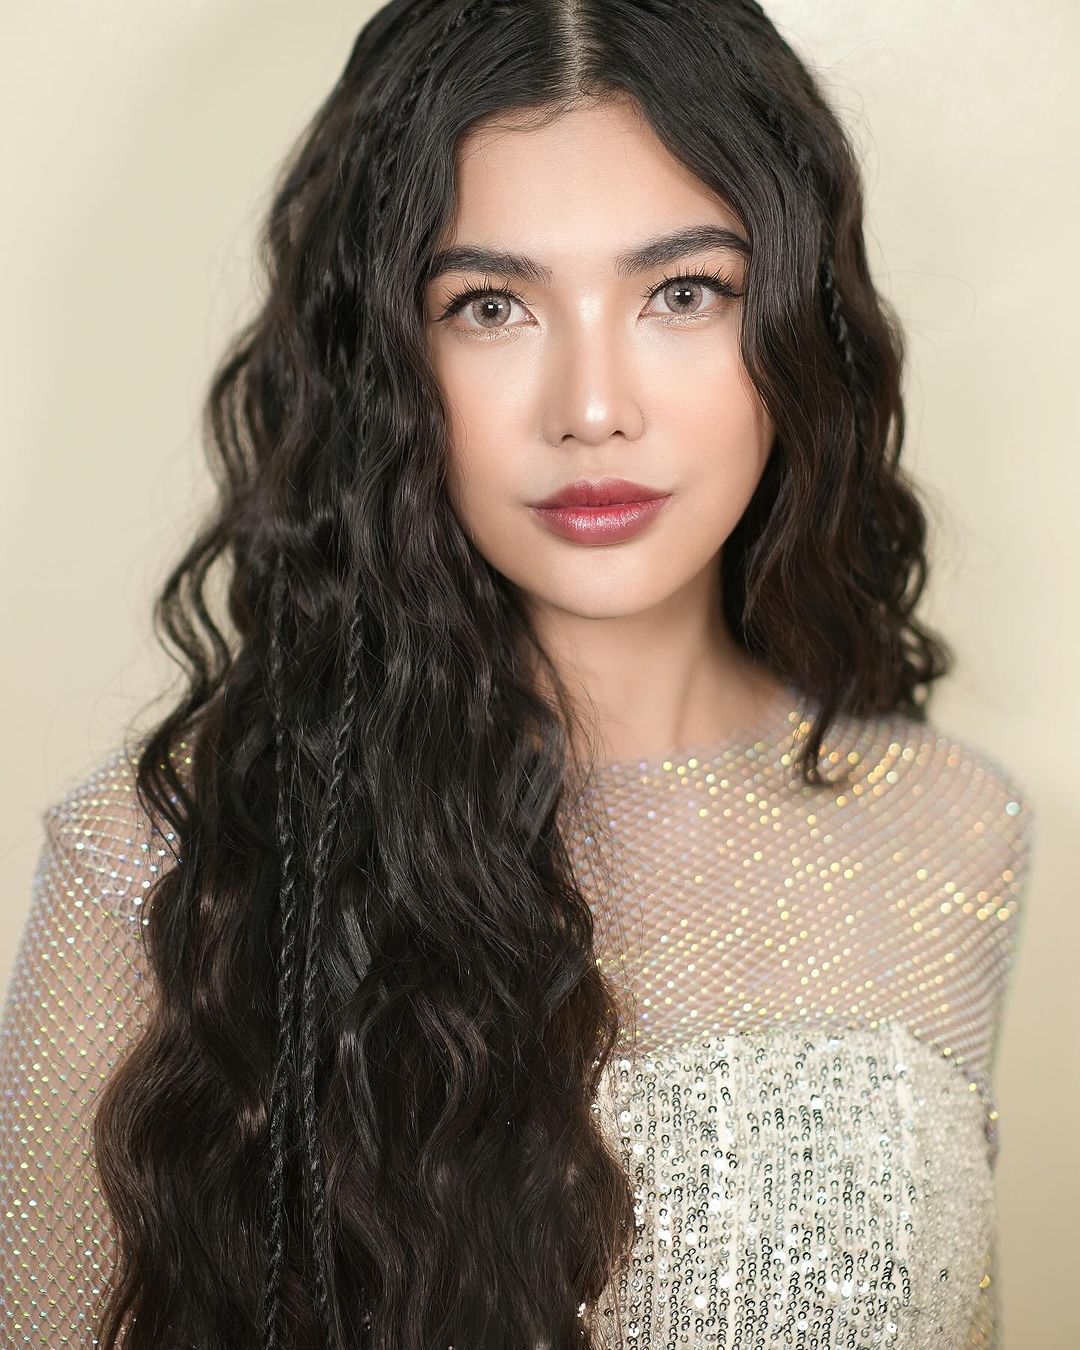 Jane De Leon in braids and stained lips